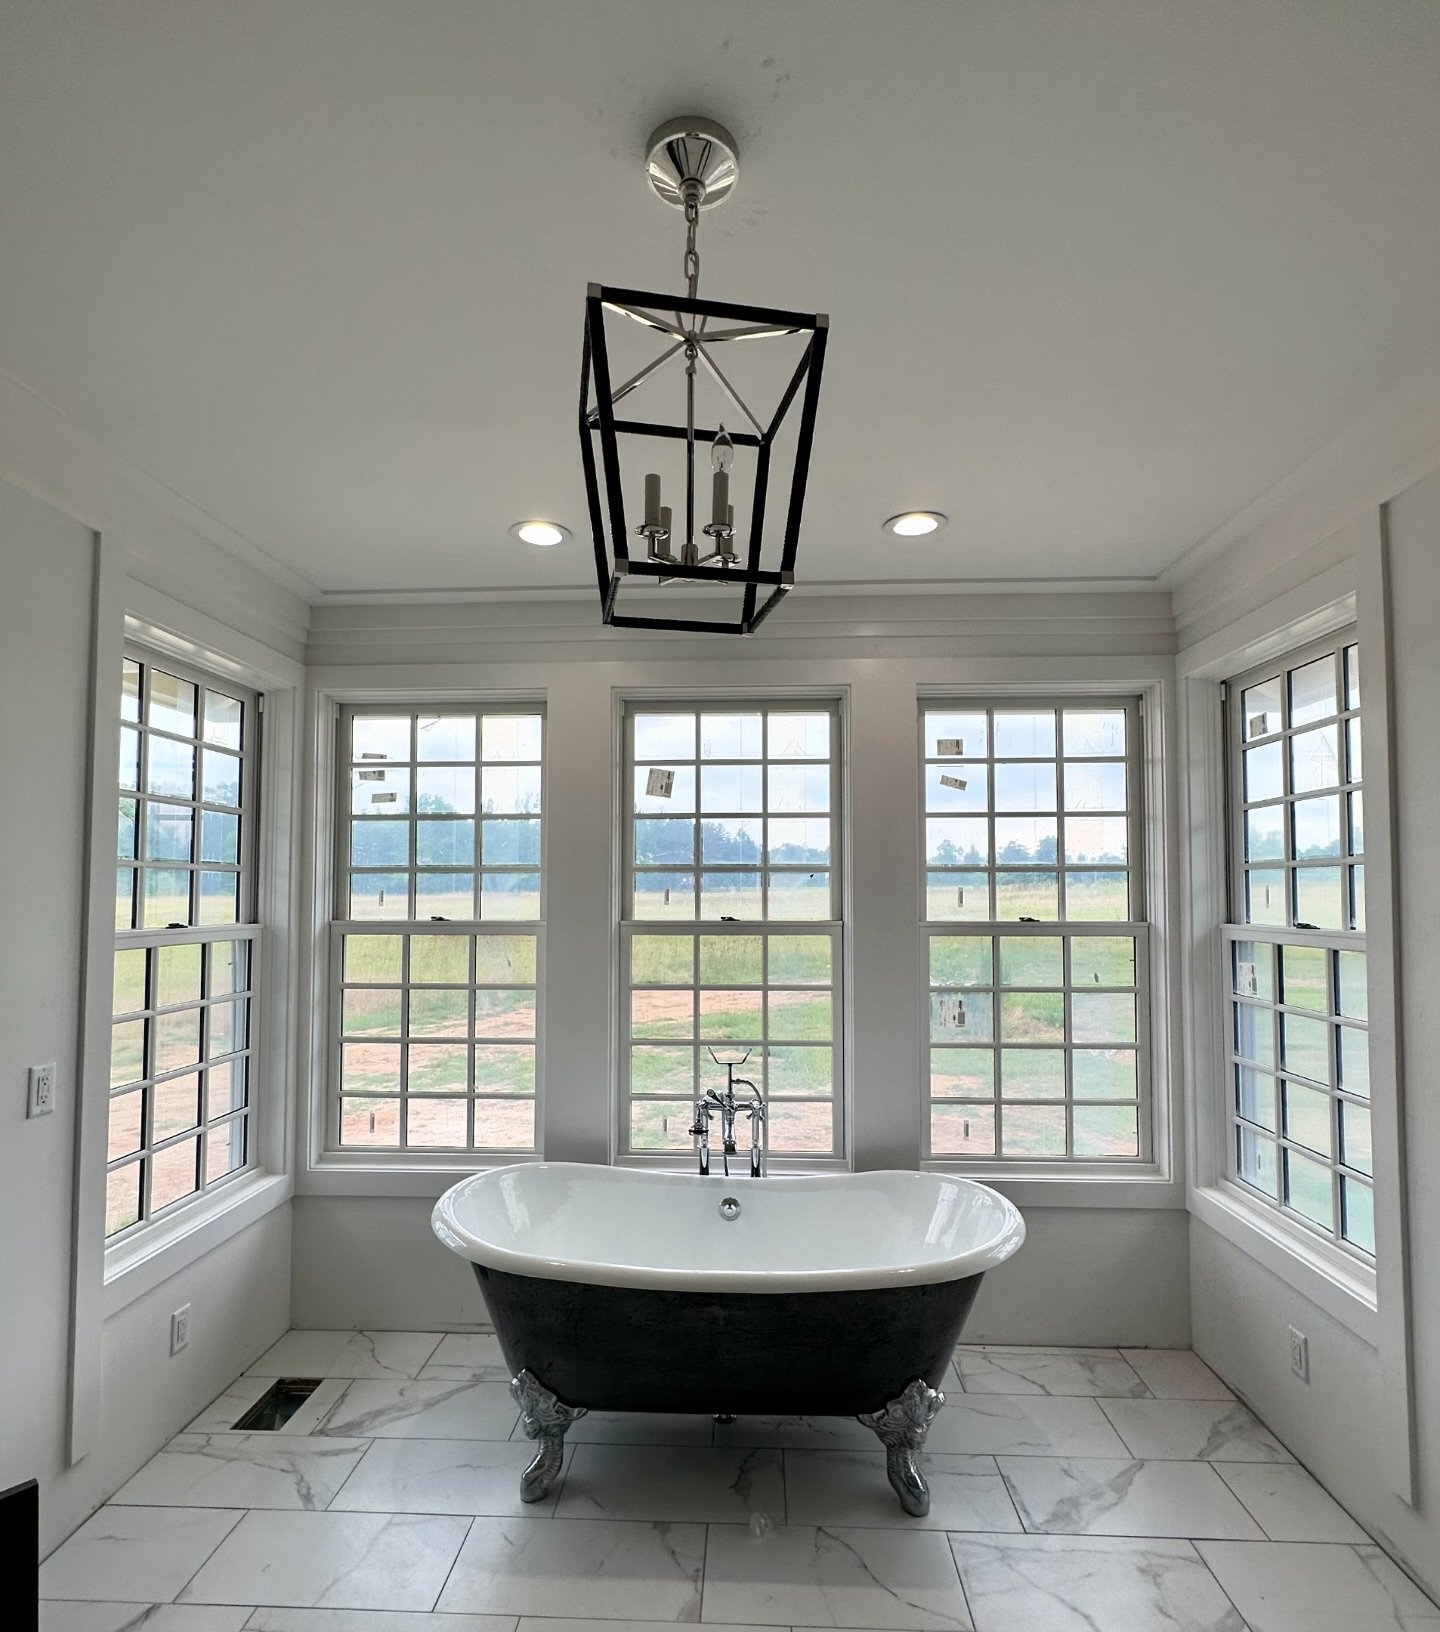 Just add 🫧 bubbles,🍷 wine, and a good book! 📖 

This new build in South Arkansas has so many wonderful details and is situated on a beautiful piece of land. The Primary Bath is just one of the many great views from the home.